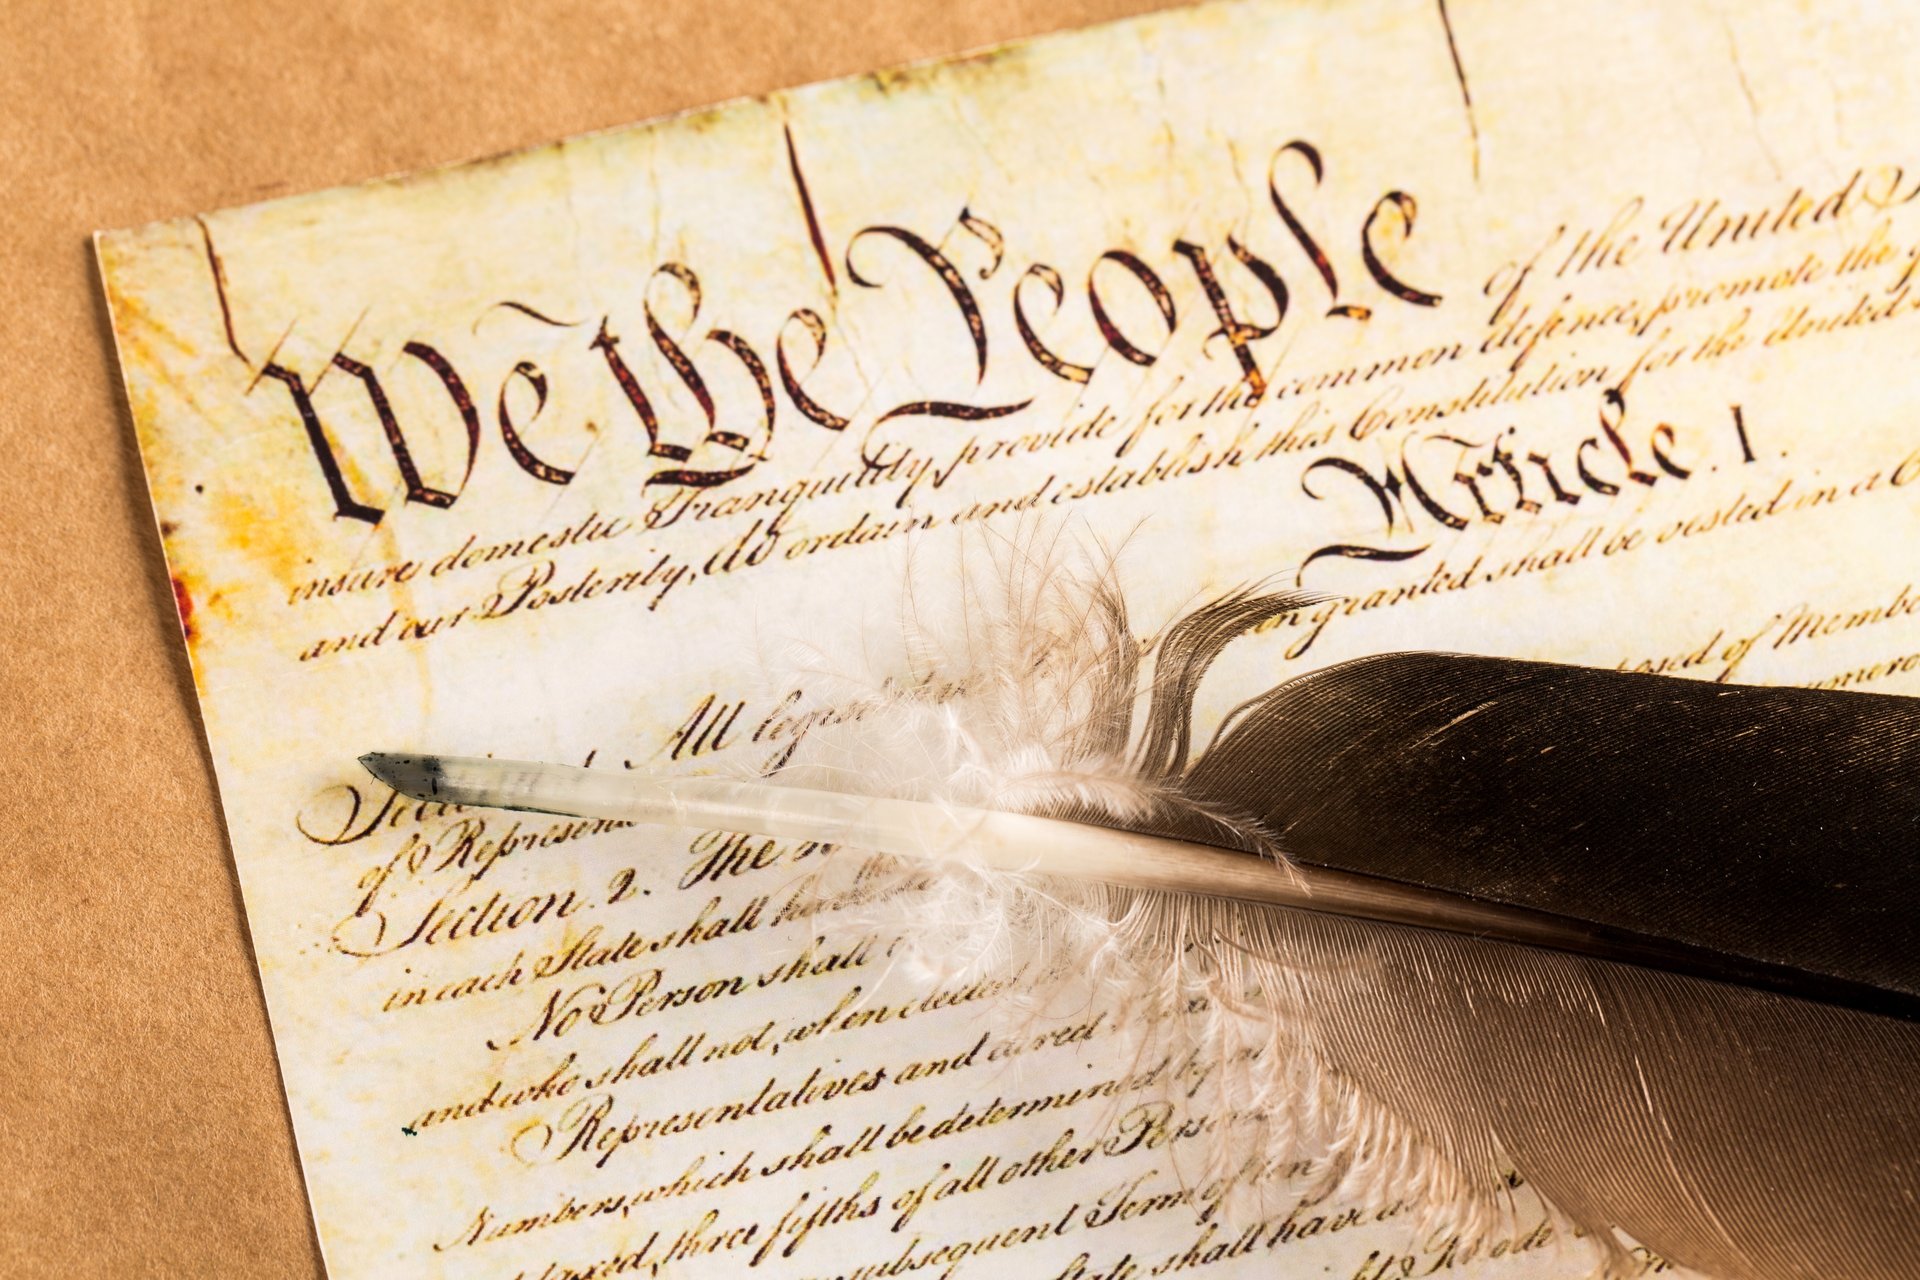 Request a FREE copy of the U.S. Constitution & Declaration of